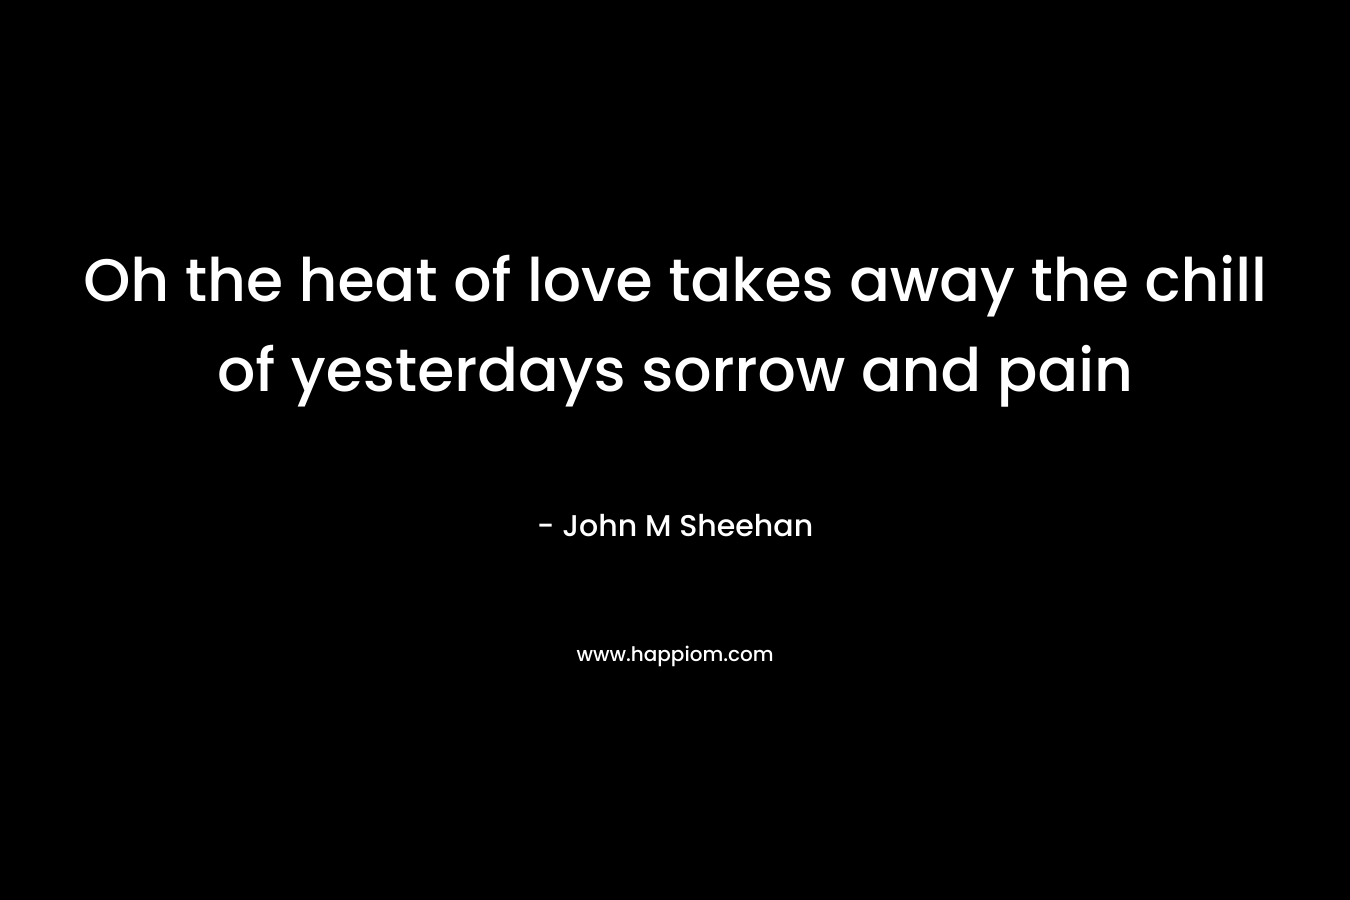 Oh the heat of love takes away the chill of yesterdays sorrow and pain